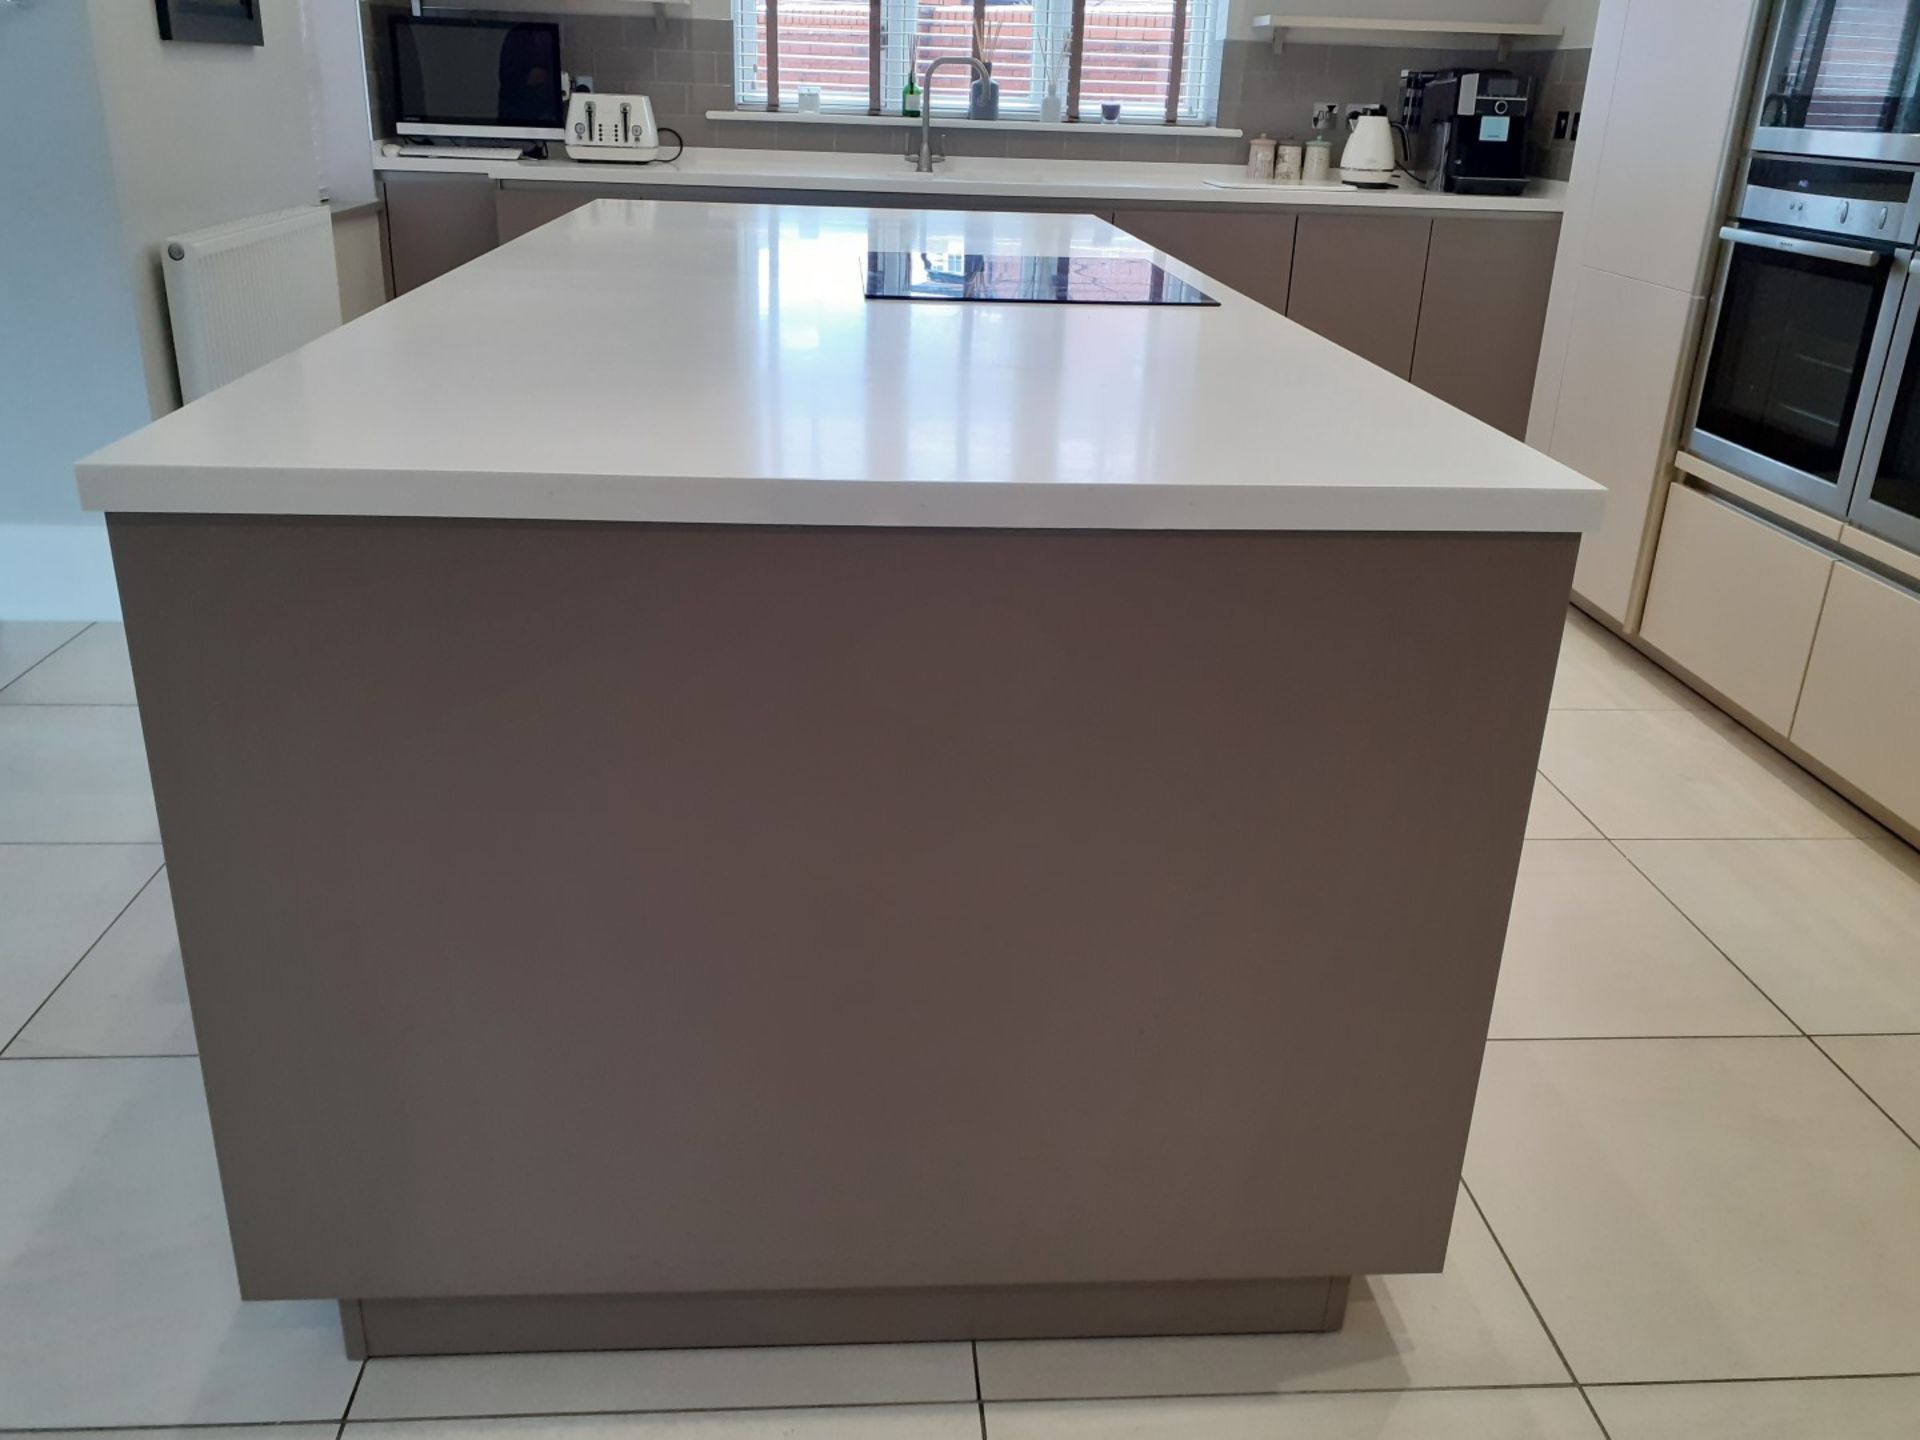 1 x SieMatic Handleless Fitted Kitchen With Intergrated NEFF Appliances, Corian Worktops And Island - Image 6 of 92